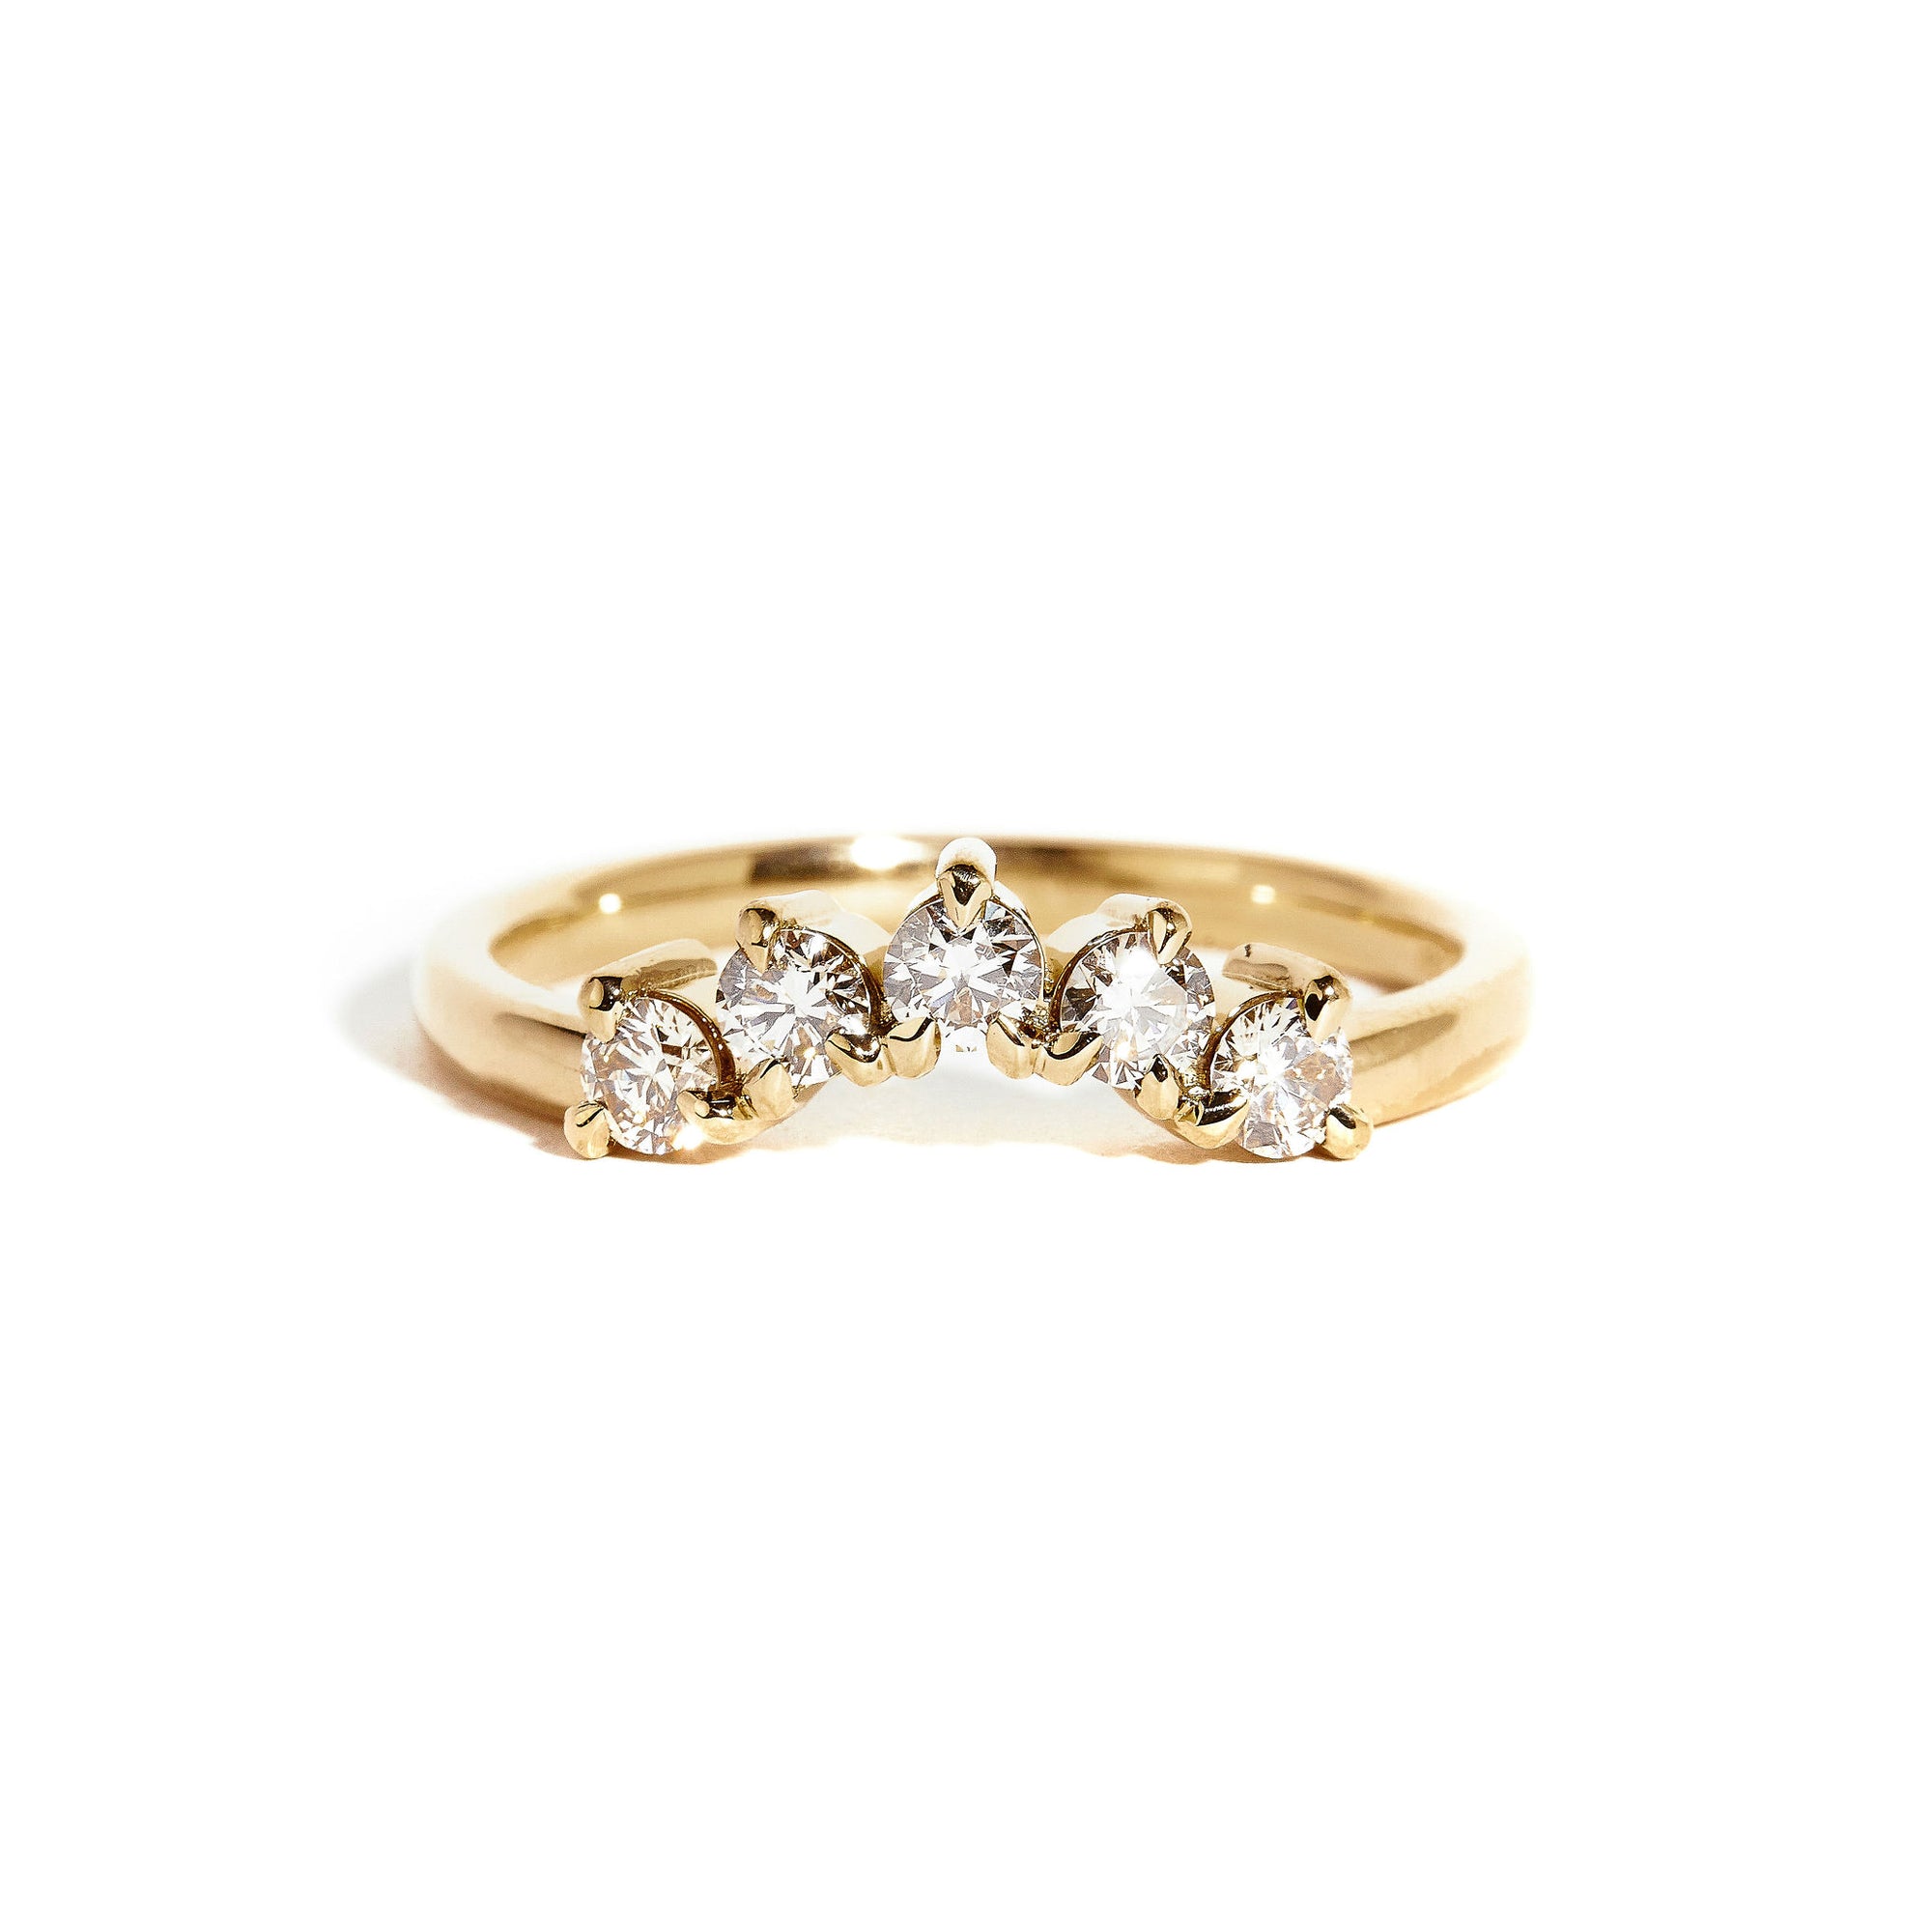 18 carat yellow gold woman's wedding band with 5 round champagne diamonds, claw set in a slight curve.